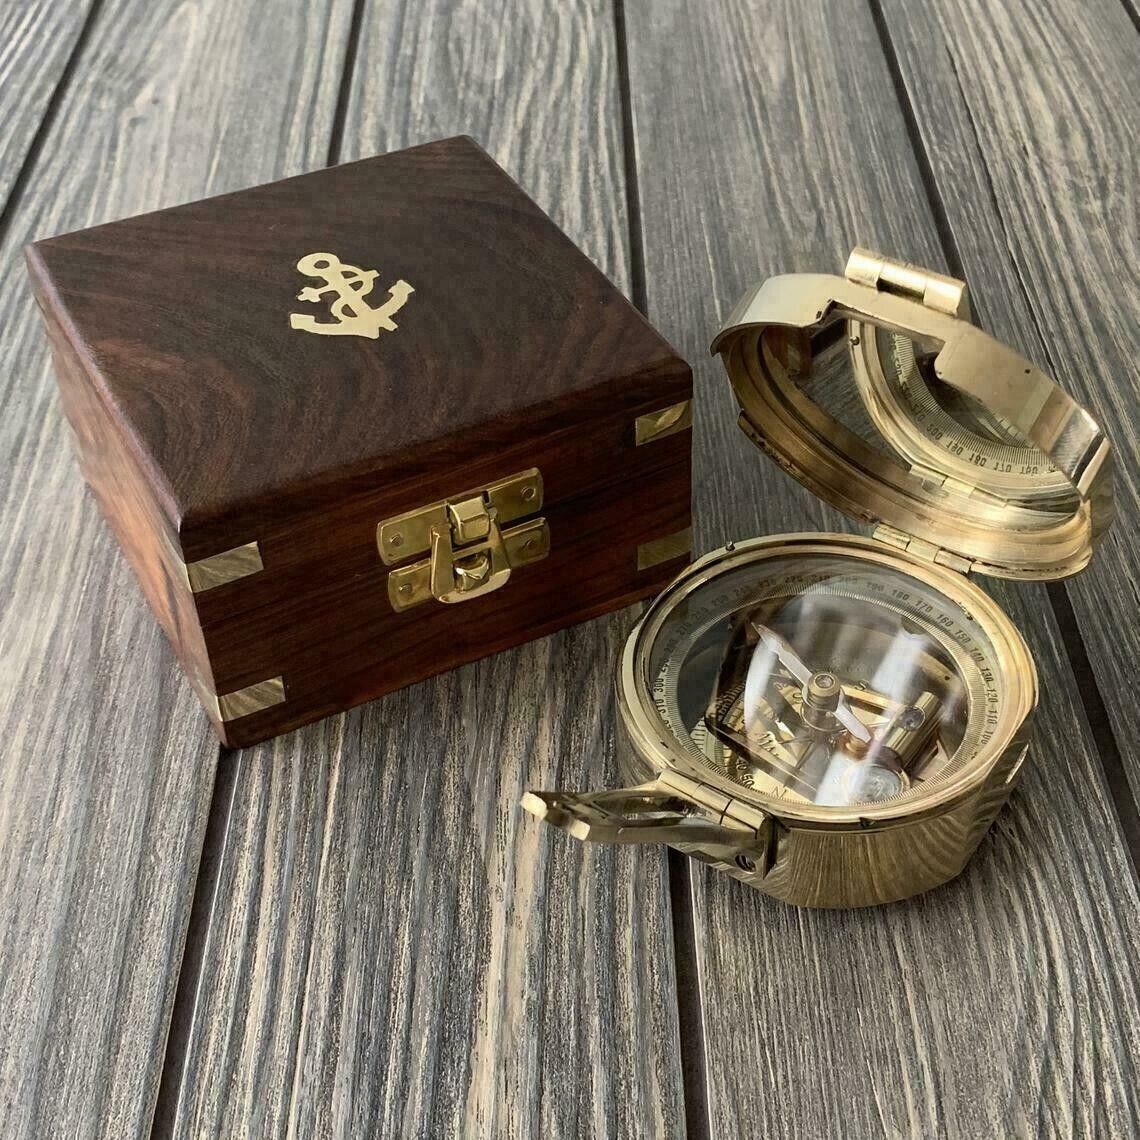 Brass Brunton Pocket Maritime Working Compass with wooden box Nautical Gift Item